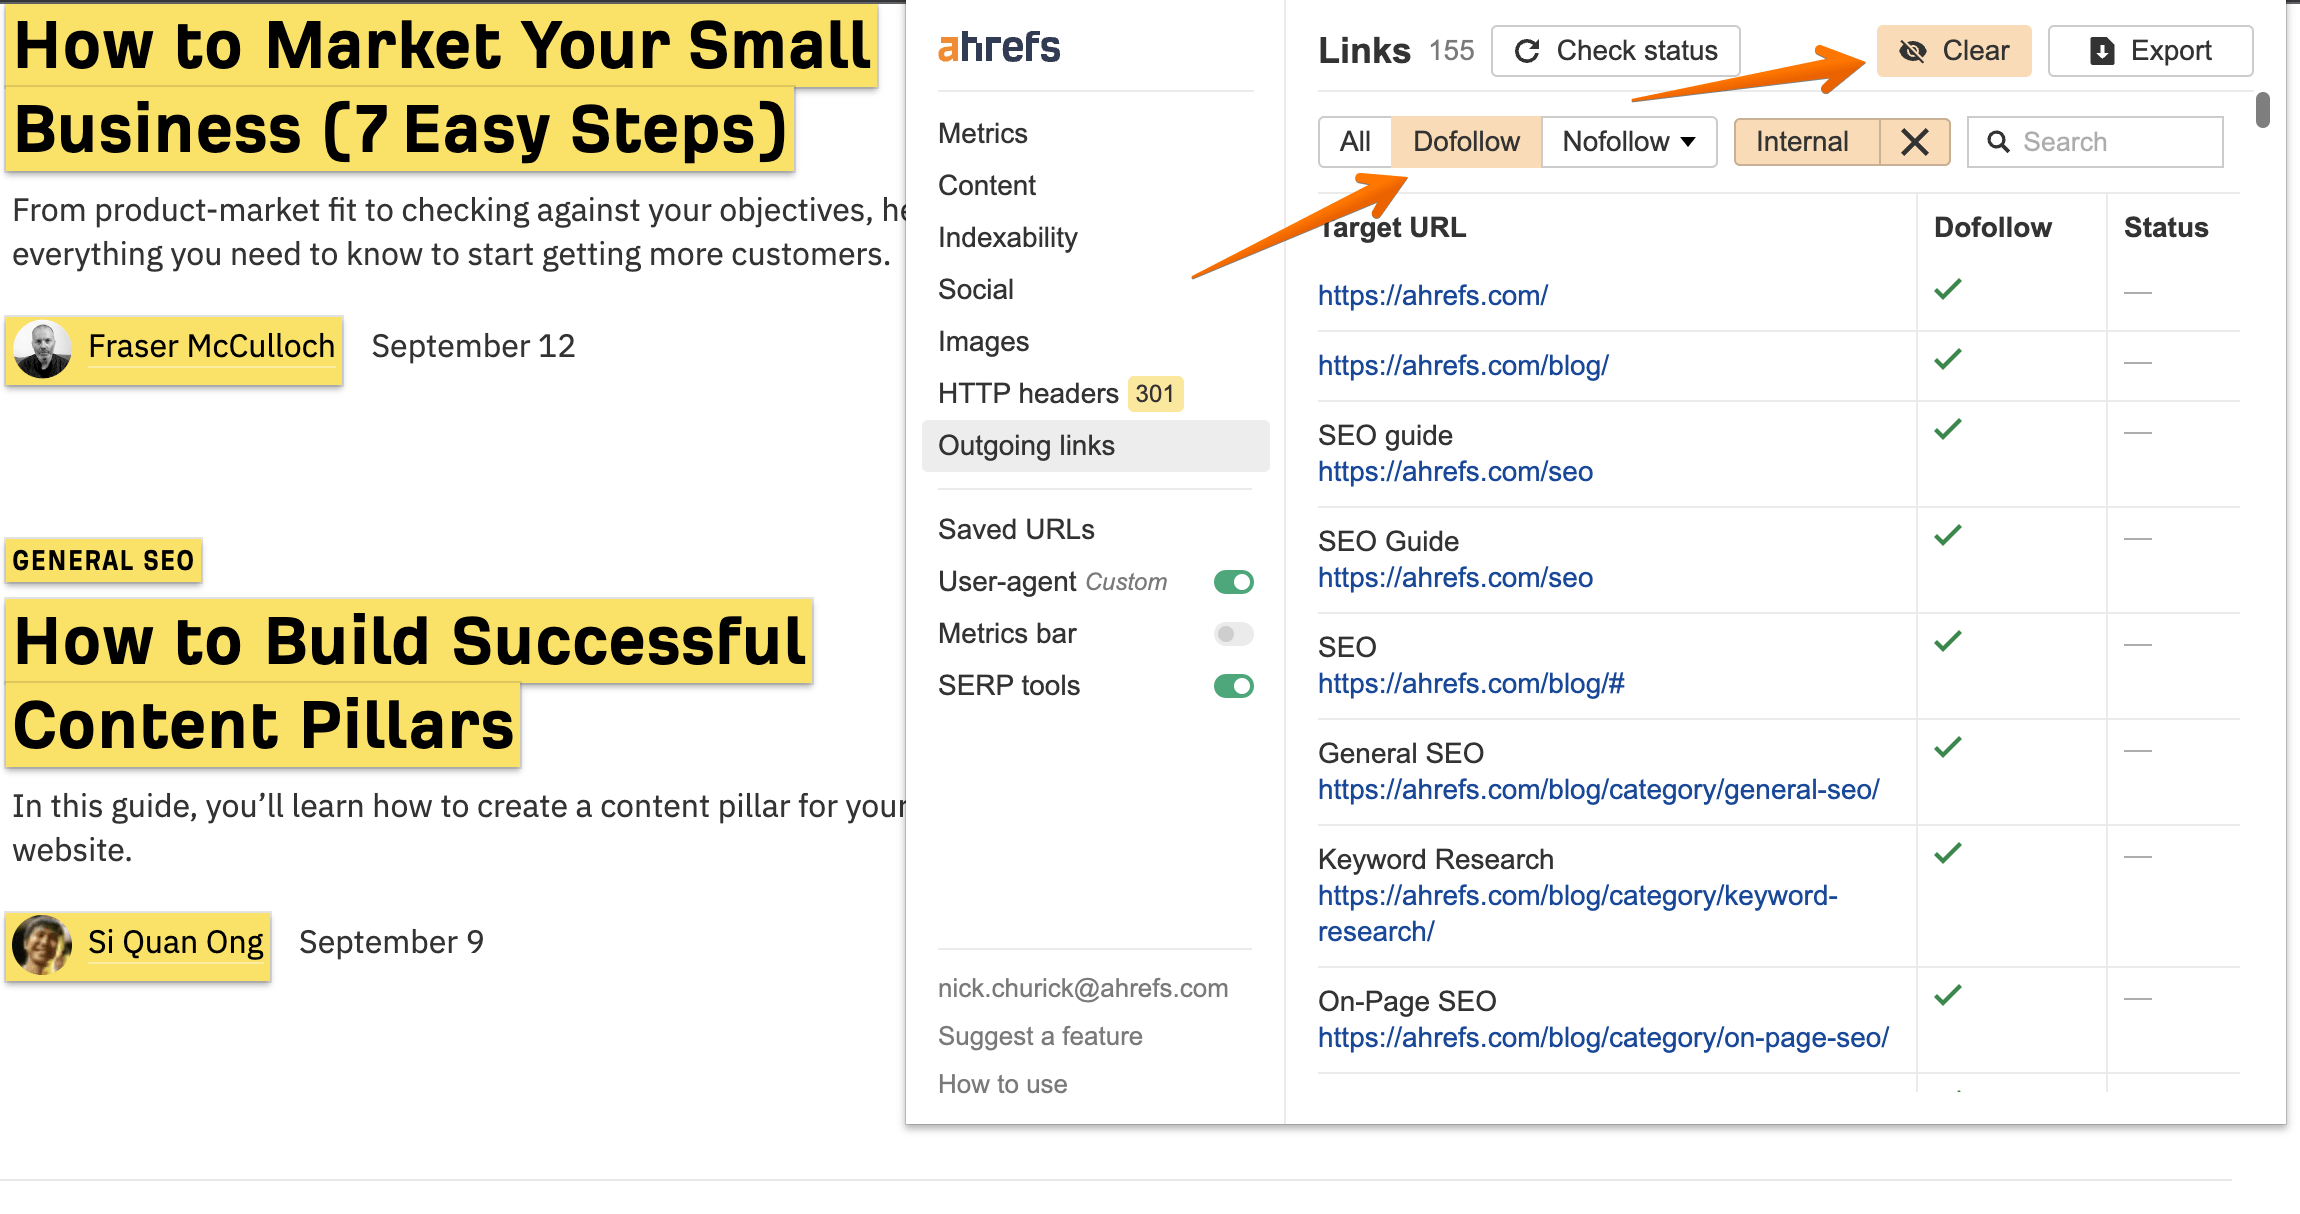 Highlighting-Dofollow-links-with-Ahrefs-SEO-Toolbar.png